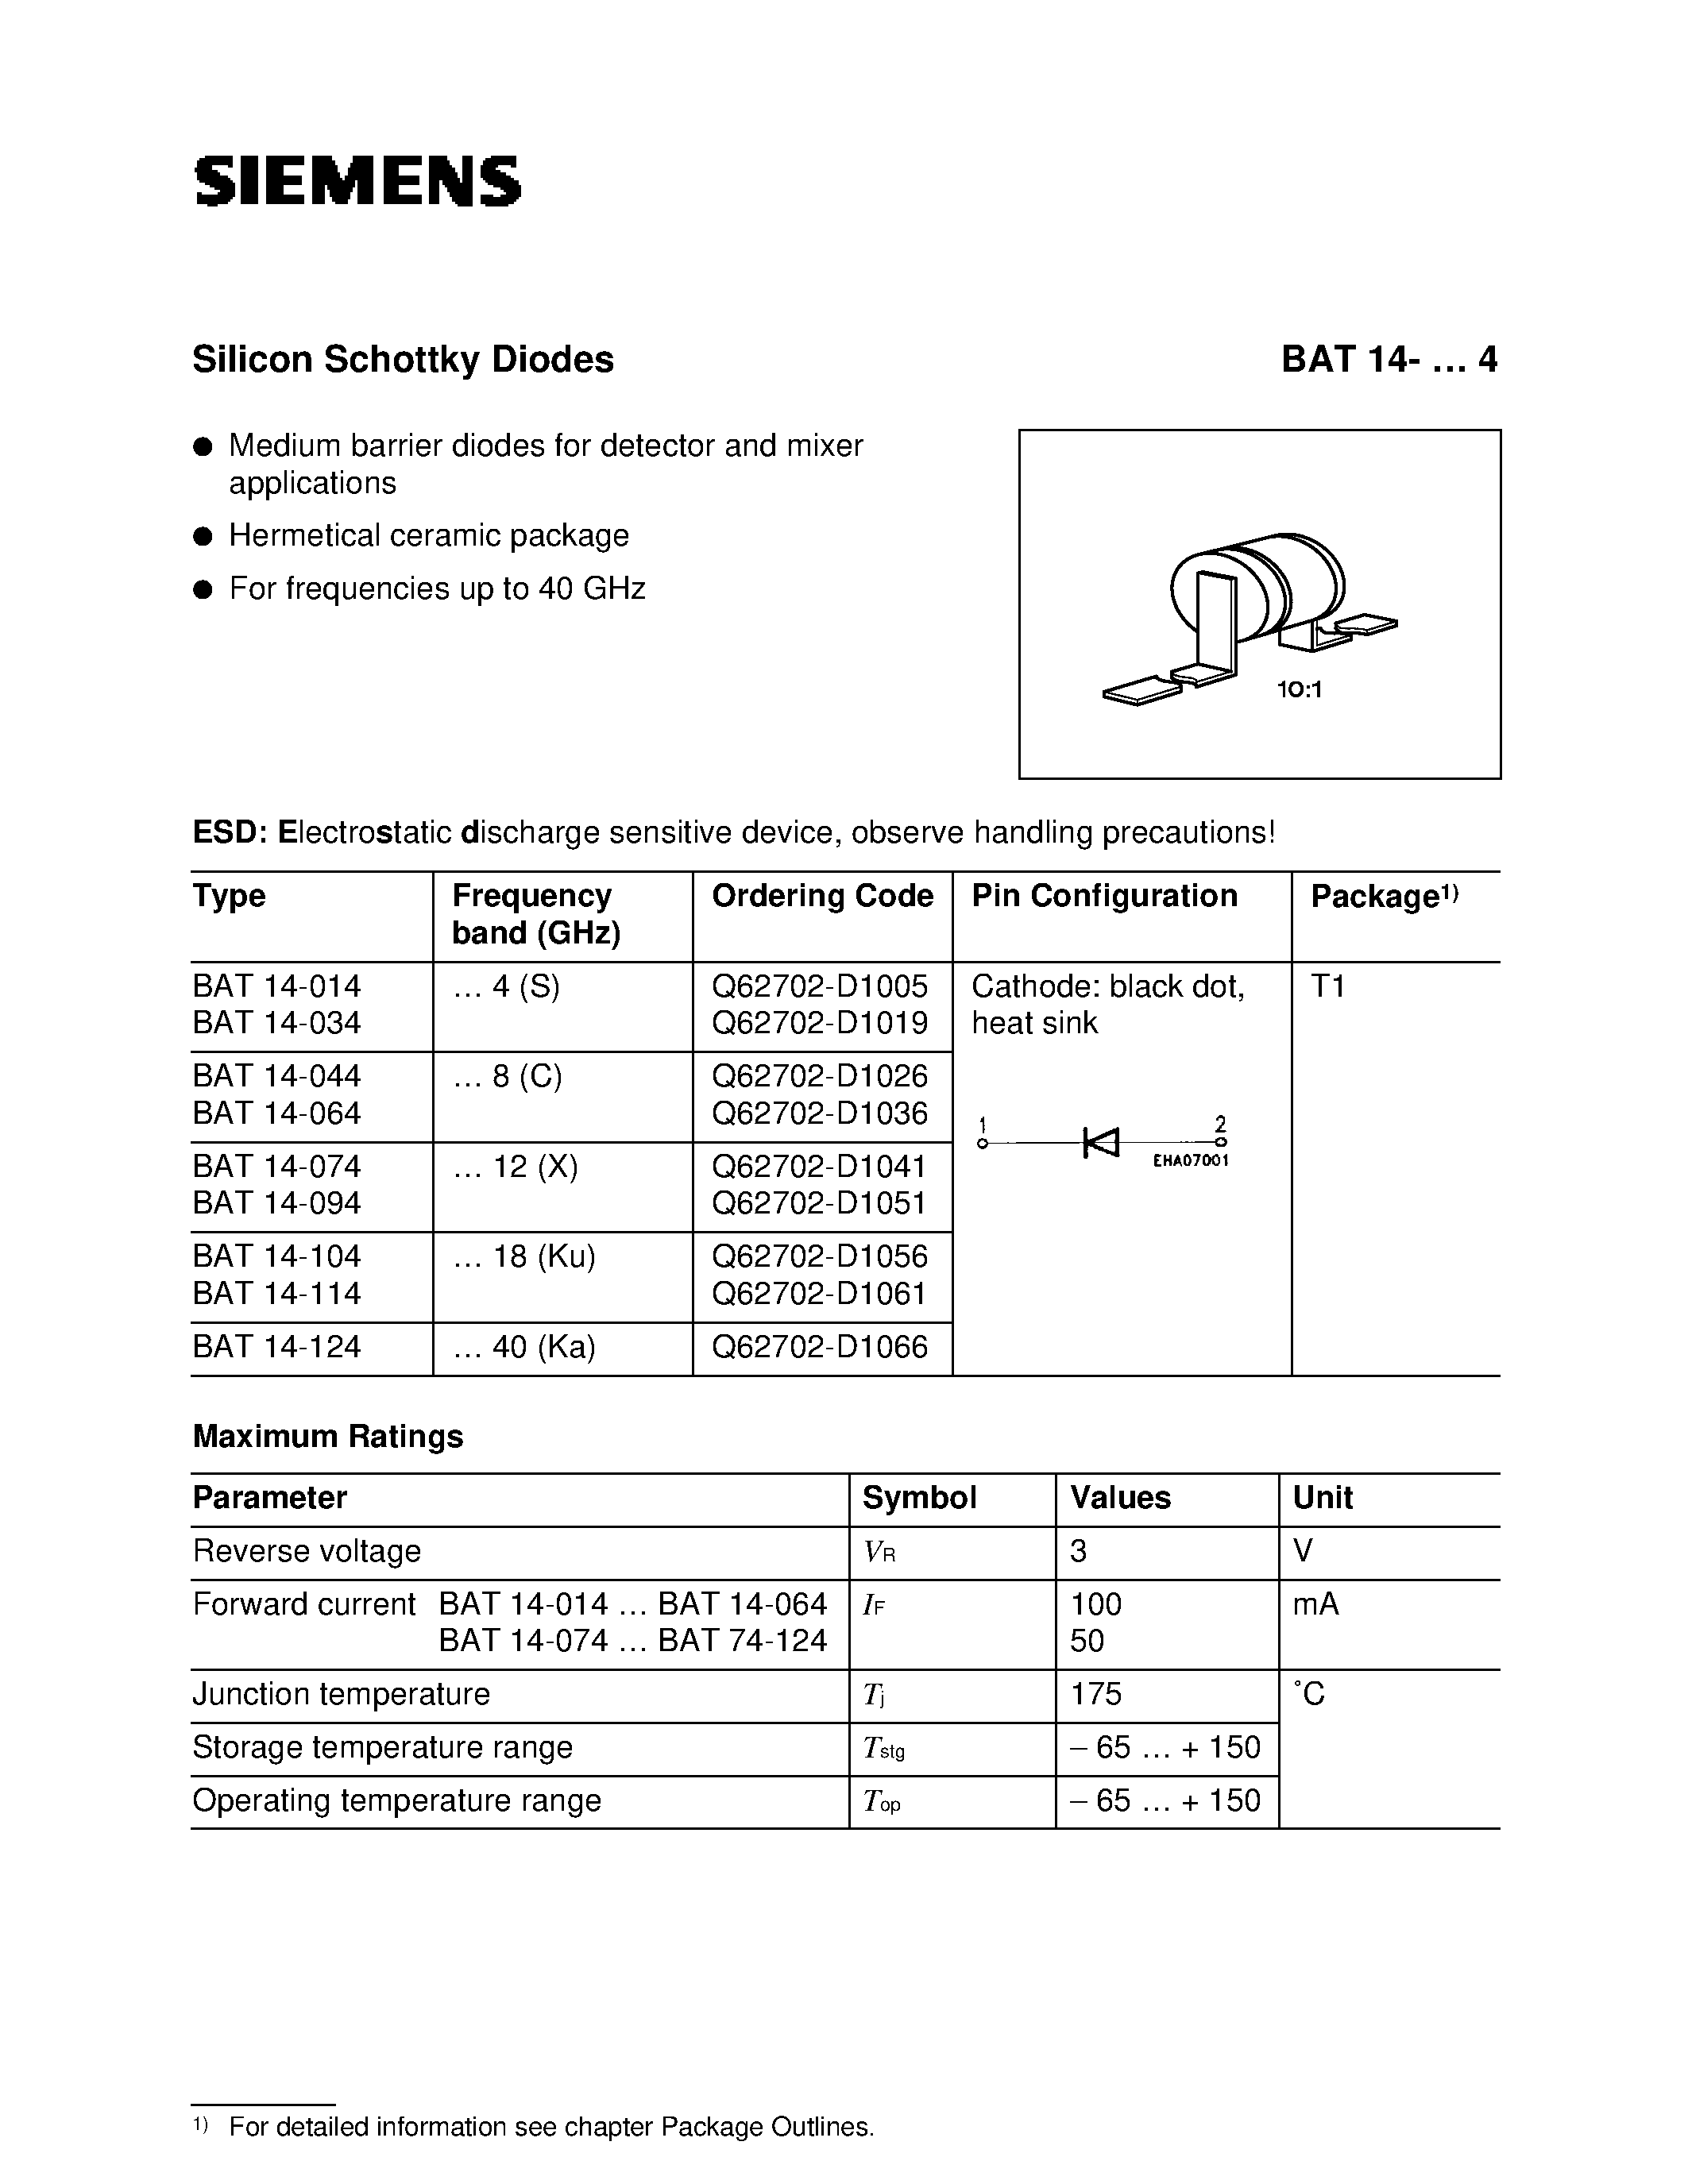 Datasheet BAT14-034 - HiRel Silicon Schottky Diode (HiRel Discrete and Microwave Semiconductor Medium barrier diodes for detector and mixer applications) page 1